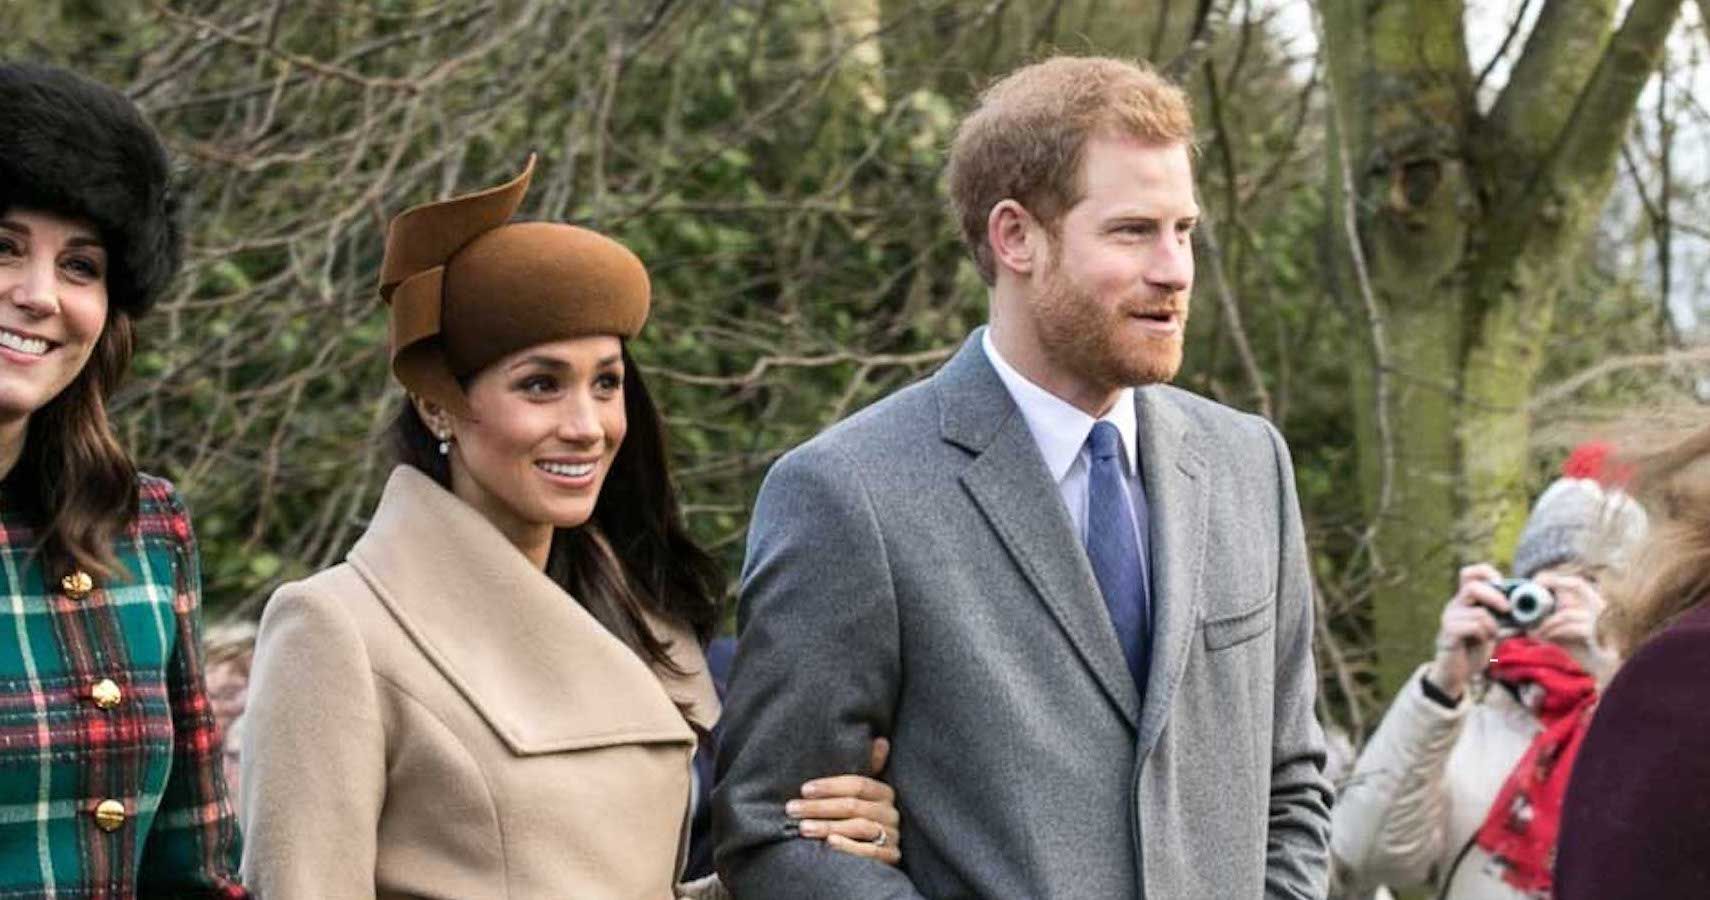 Prince Harry and the Duchess, Meghan Markle